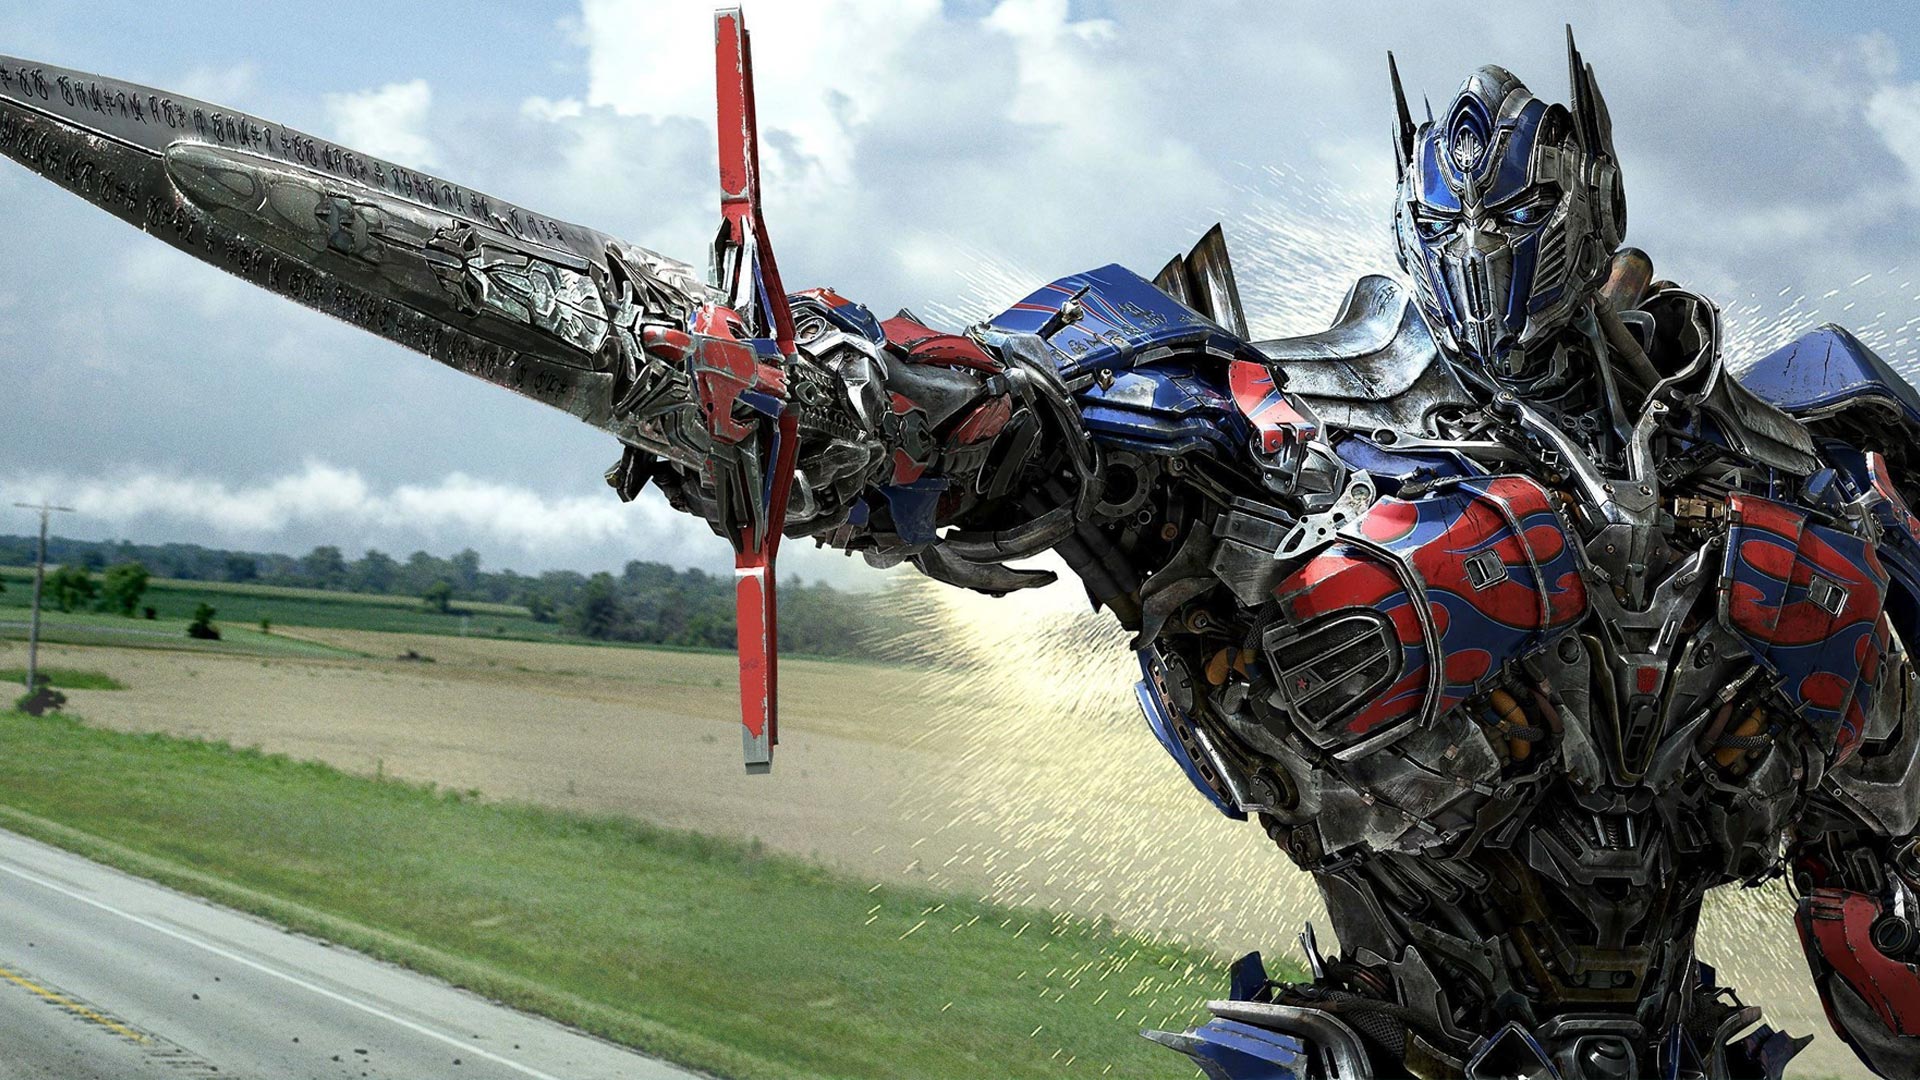 Optimus Prime holds the Sword of Judgement in Transformers: The Dark Knight